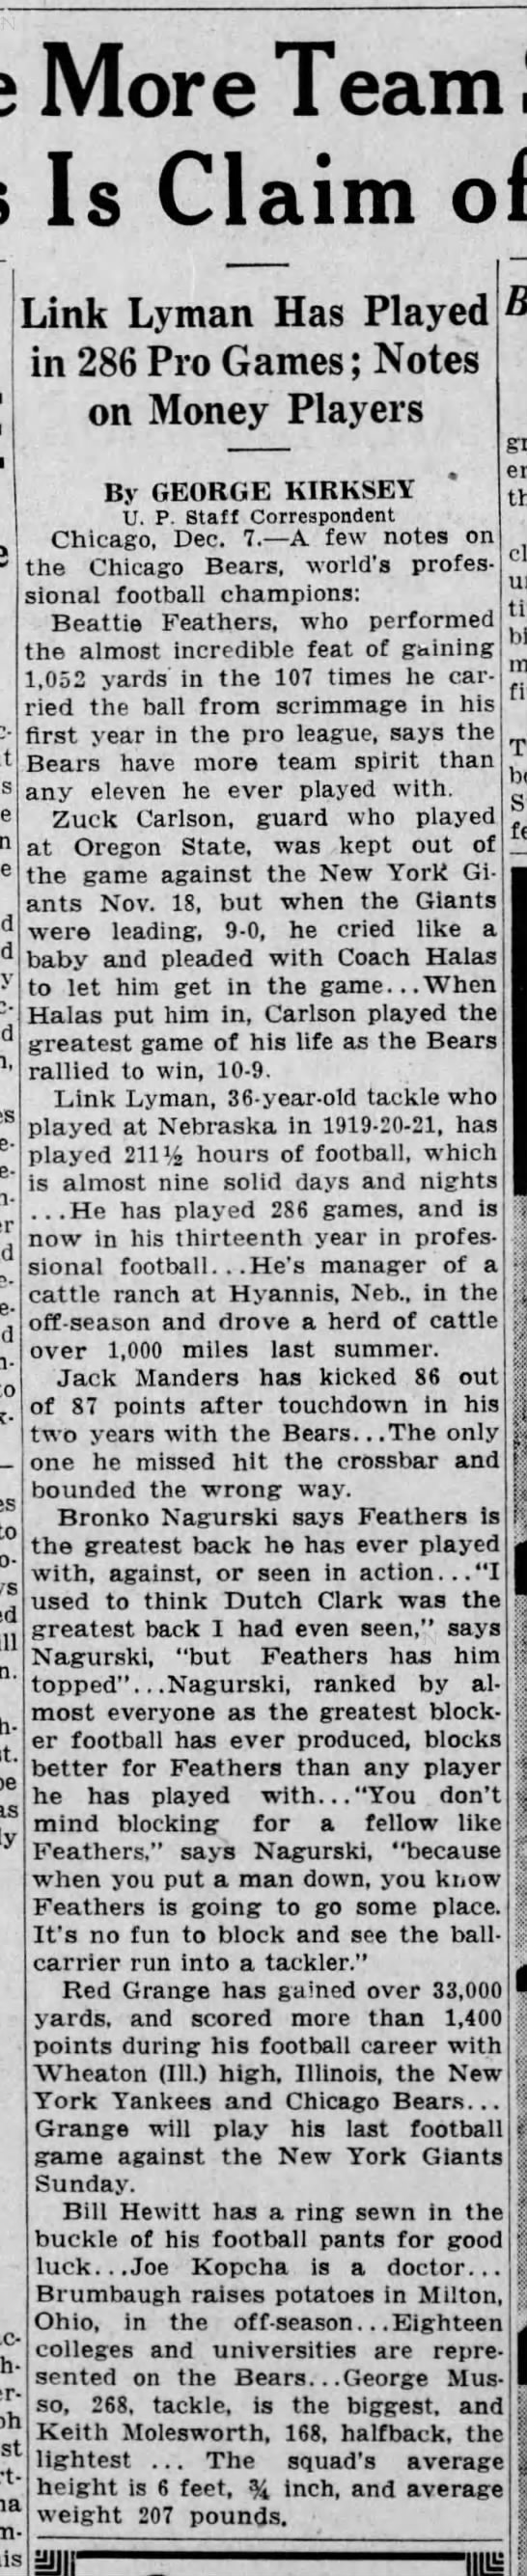 Bears Have More Team Spirit Than Collegians Is Claim of Feathers: Link Lyman Has Played In 286 Pro G - 